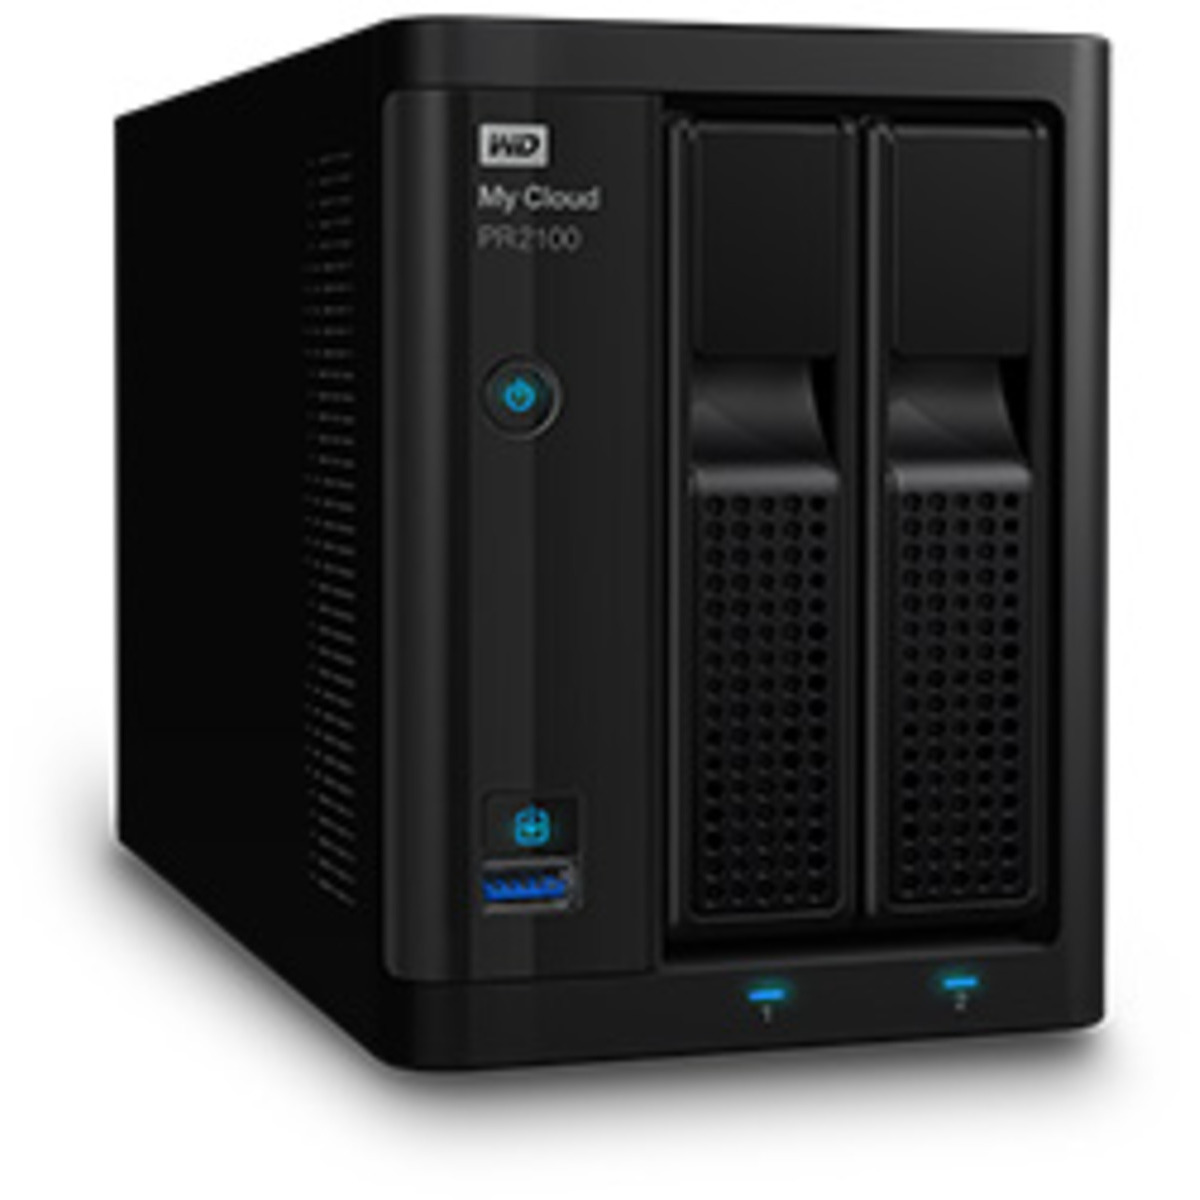 Western Digital My Cloud Pro PR2100 4tb 2-Bay Desktop Multimedia / Power User / Business NAS - Network Attached Storage Device 1x4tb Western Digital Red Plus WD40EFPX 3.5 5400rpm SATA 6Gb/s HDD NAS Class Drives Installed - Burn-In Tested My Cloud Pro PR2100